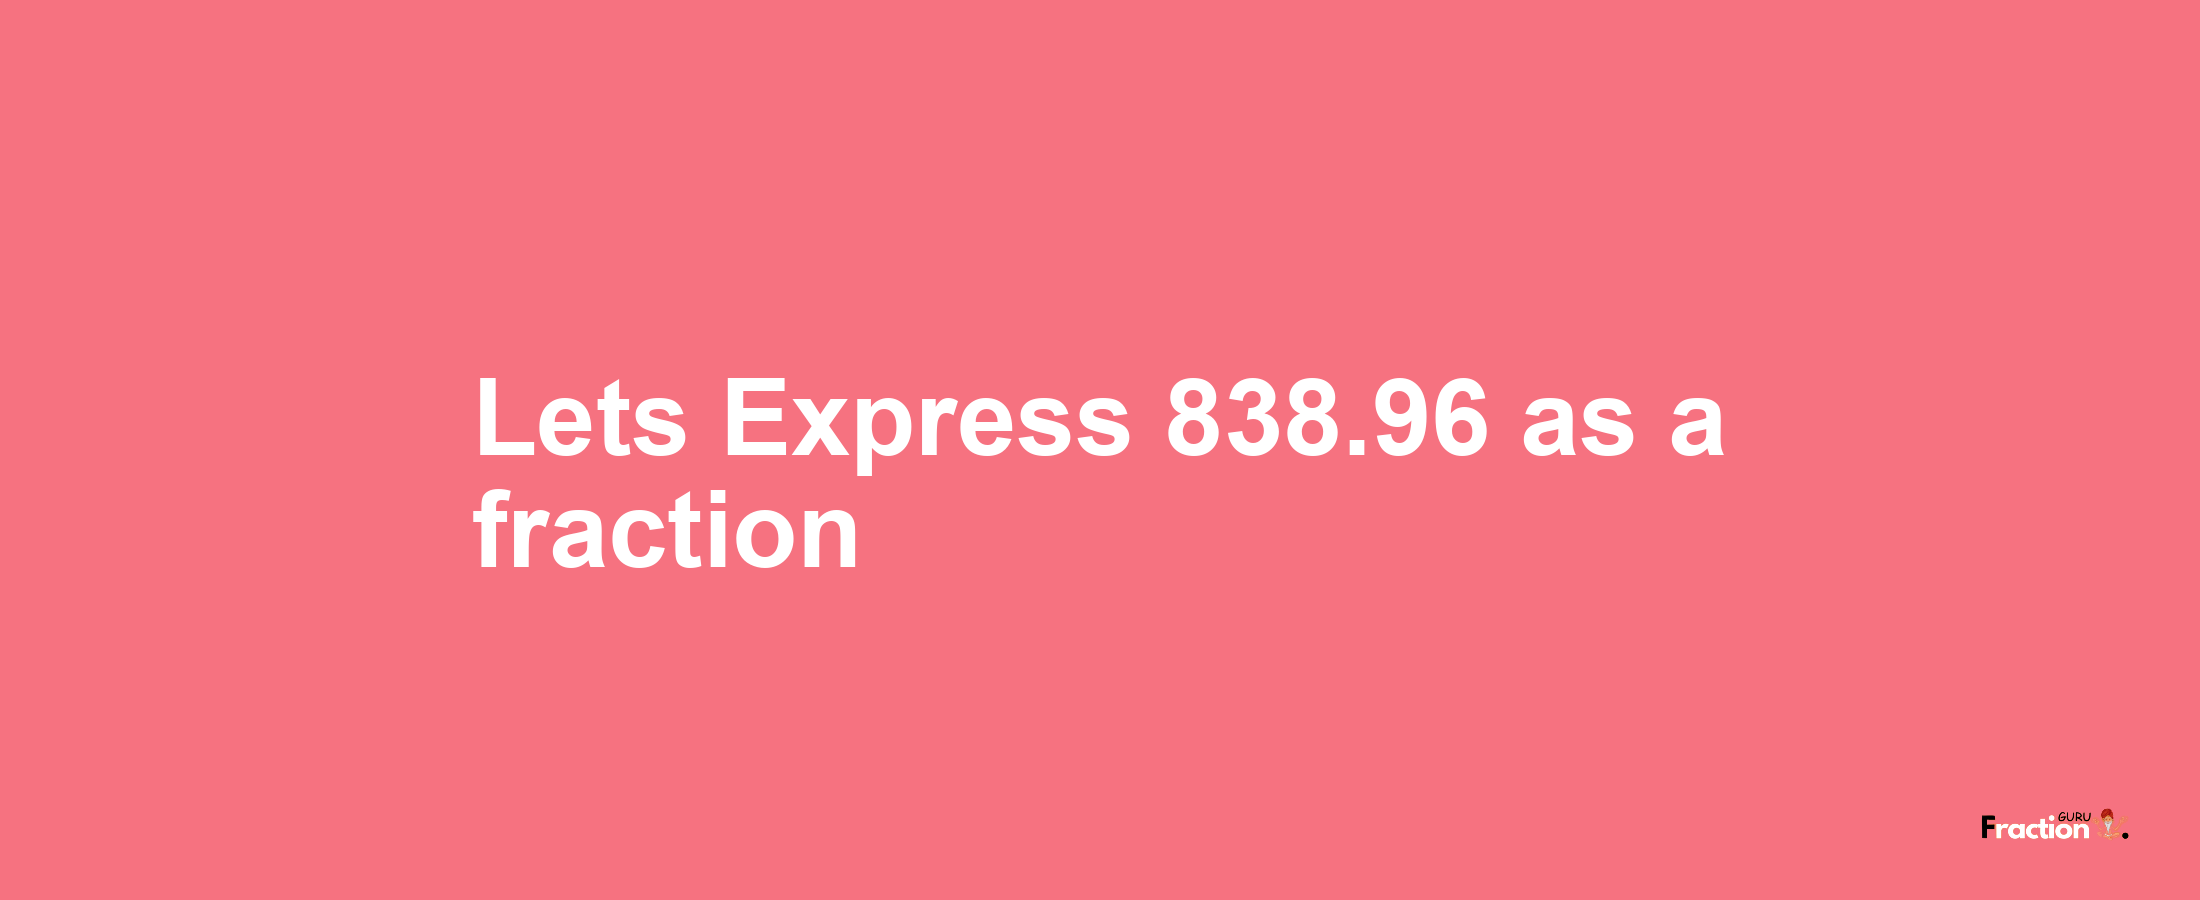 Lets Express 838.96 as afraction